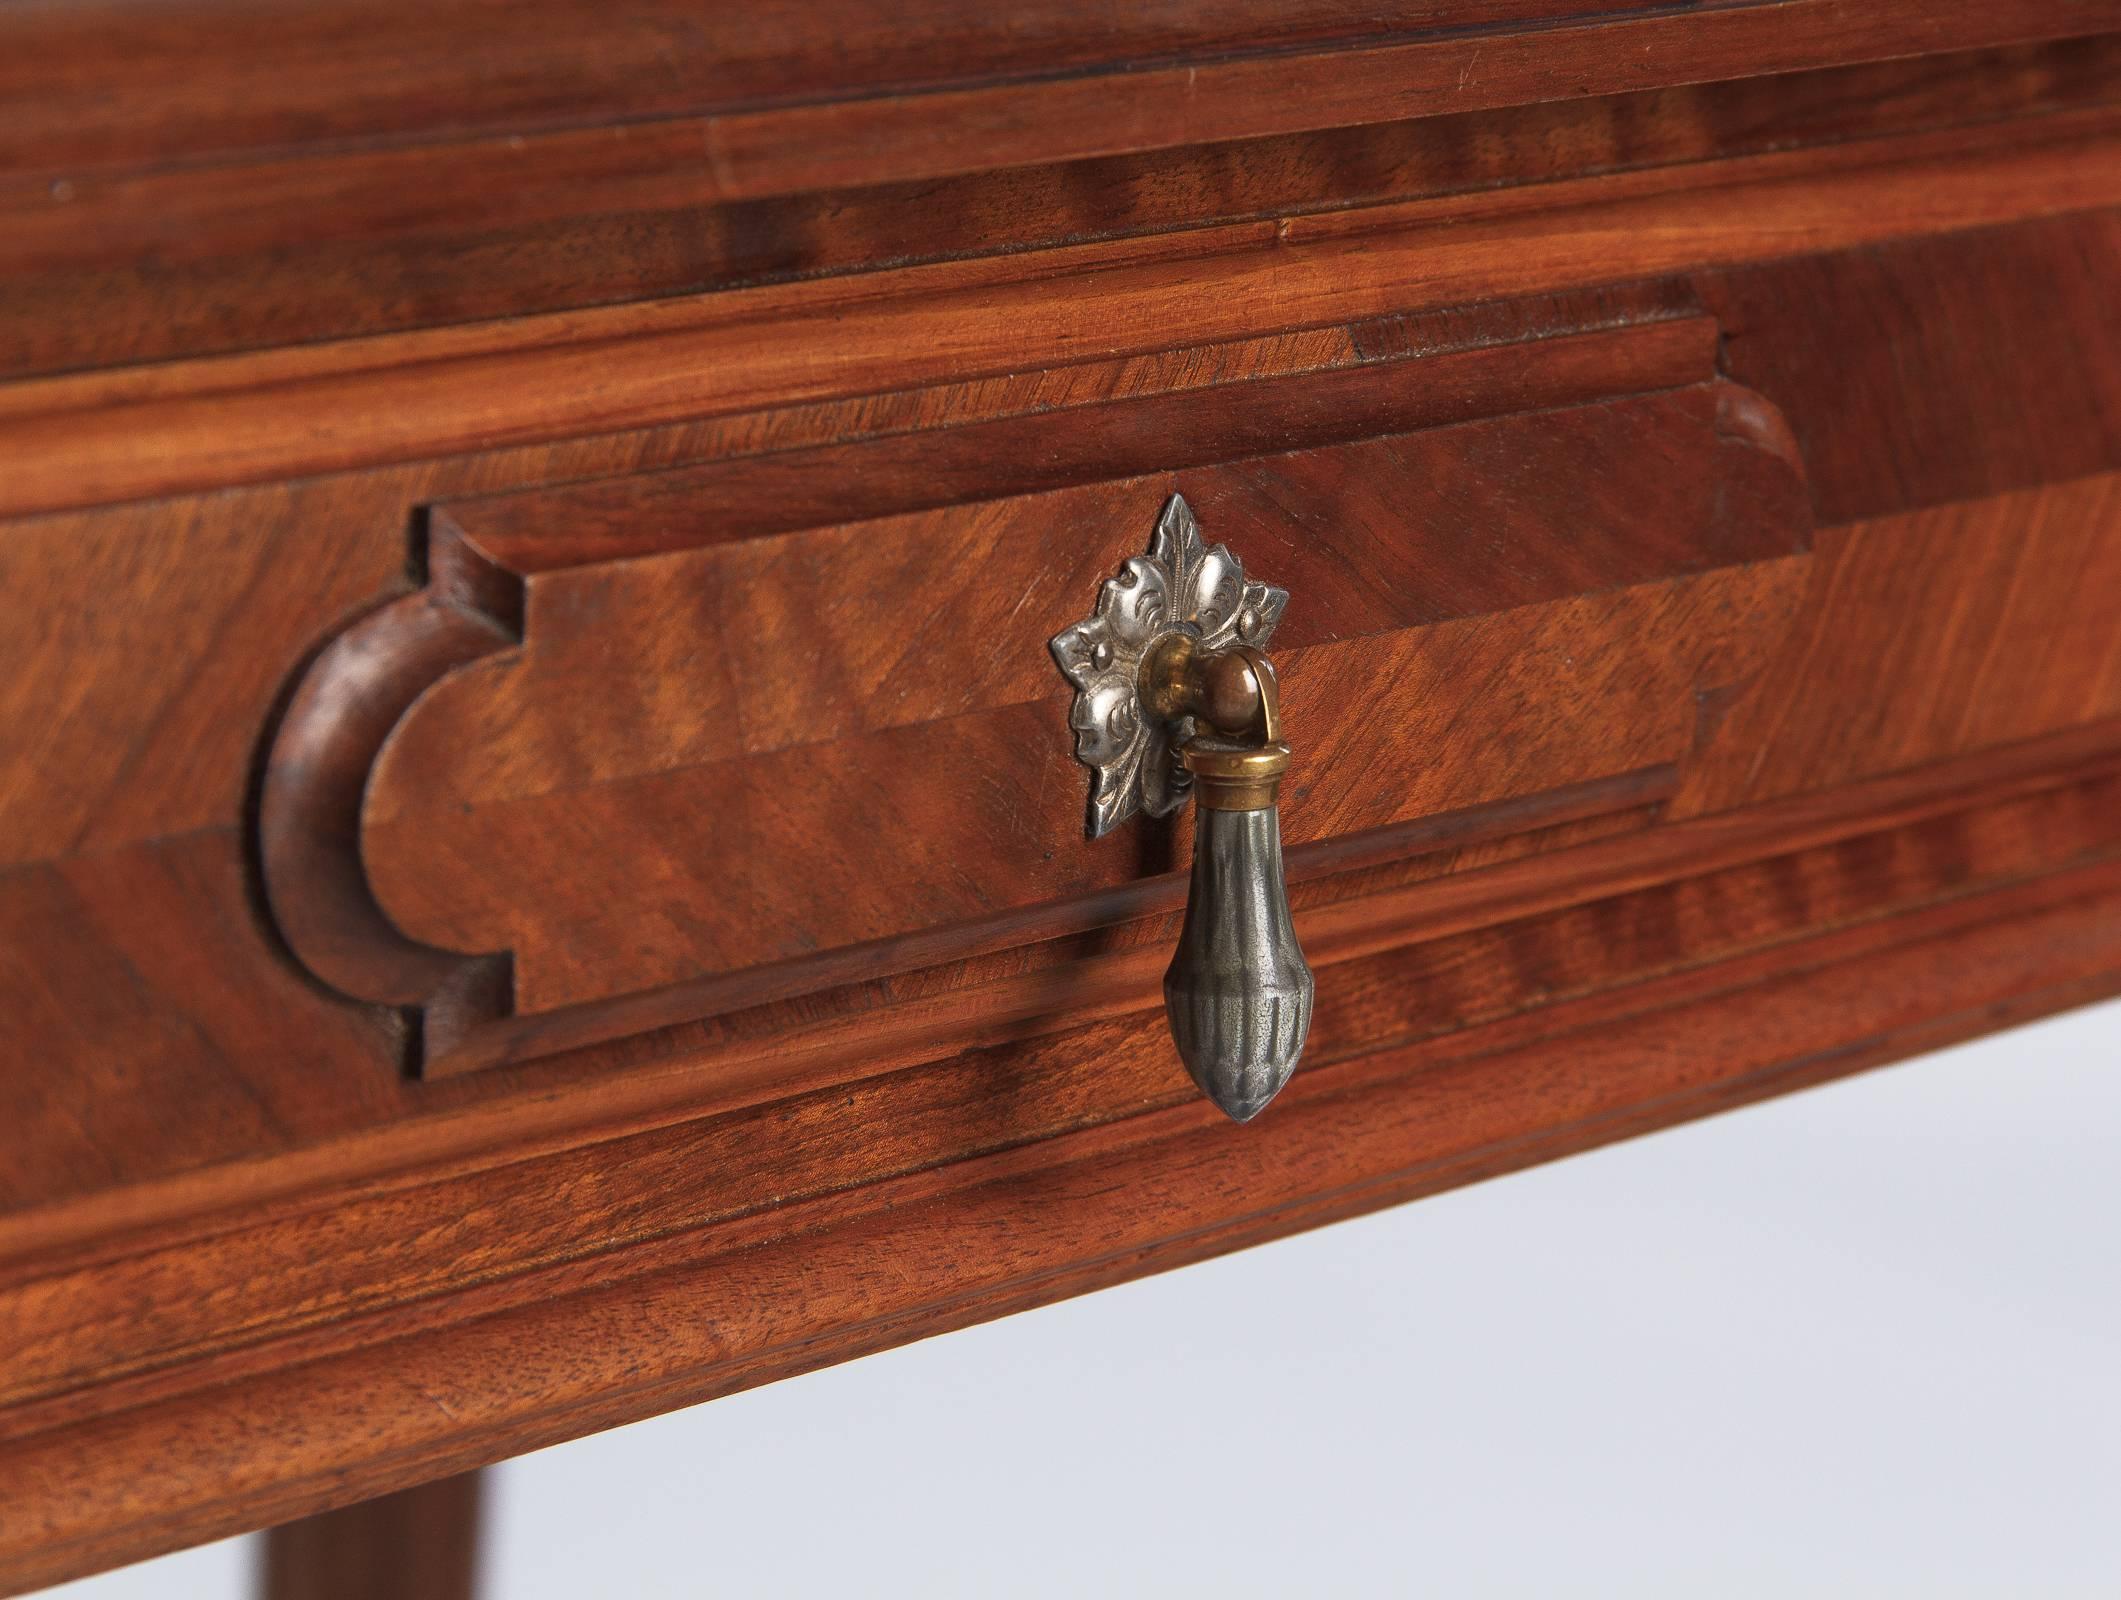 20th Century Louis XVI Style Cherrywood Desk, France, Early 1900s